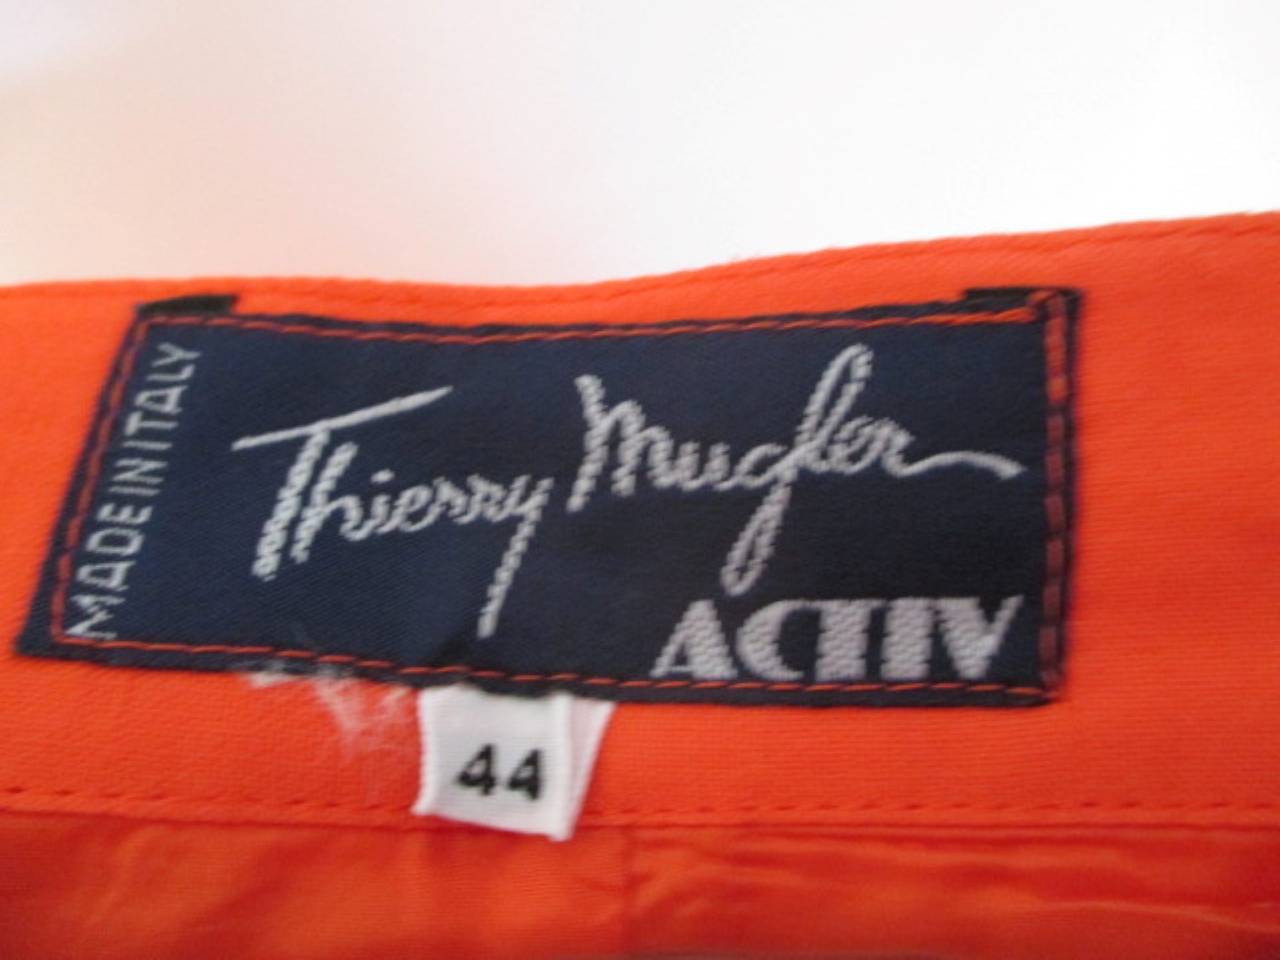 Thierry Mugler 2 piece orange skirt and top with stud buttons and zipper at the back.
The material is half Linen and half viscose.
Size is French 44 but fits like a 38/40
Its in good vintage condition.
The length of the skirt is 45 cm and the top is